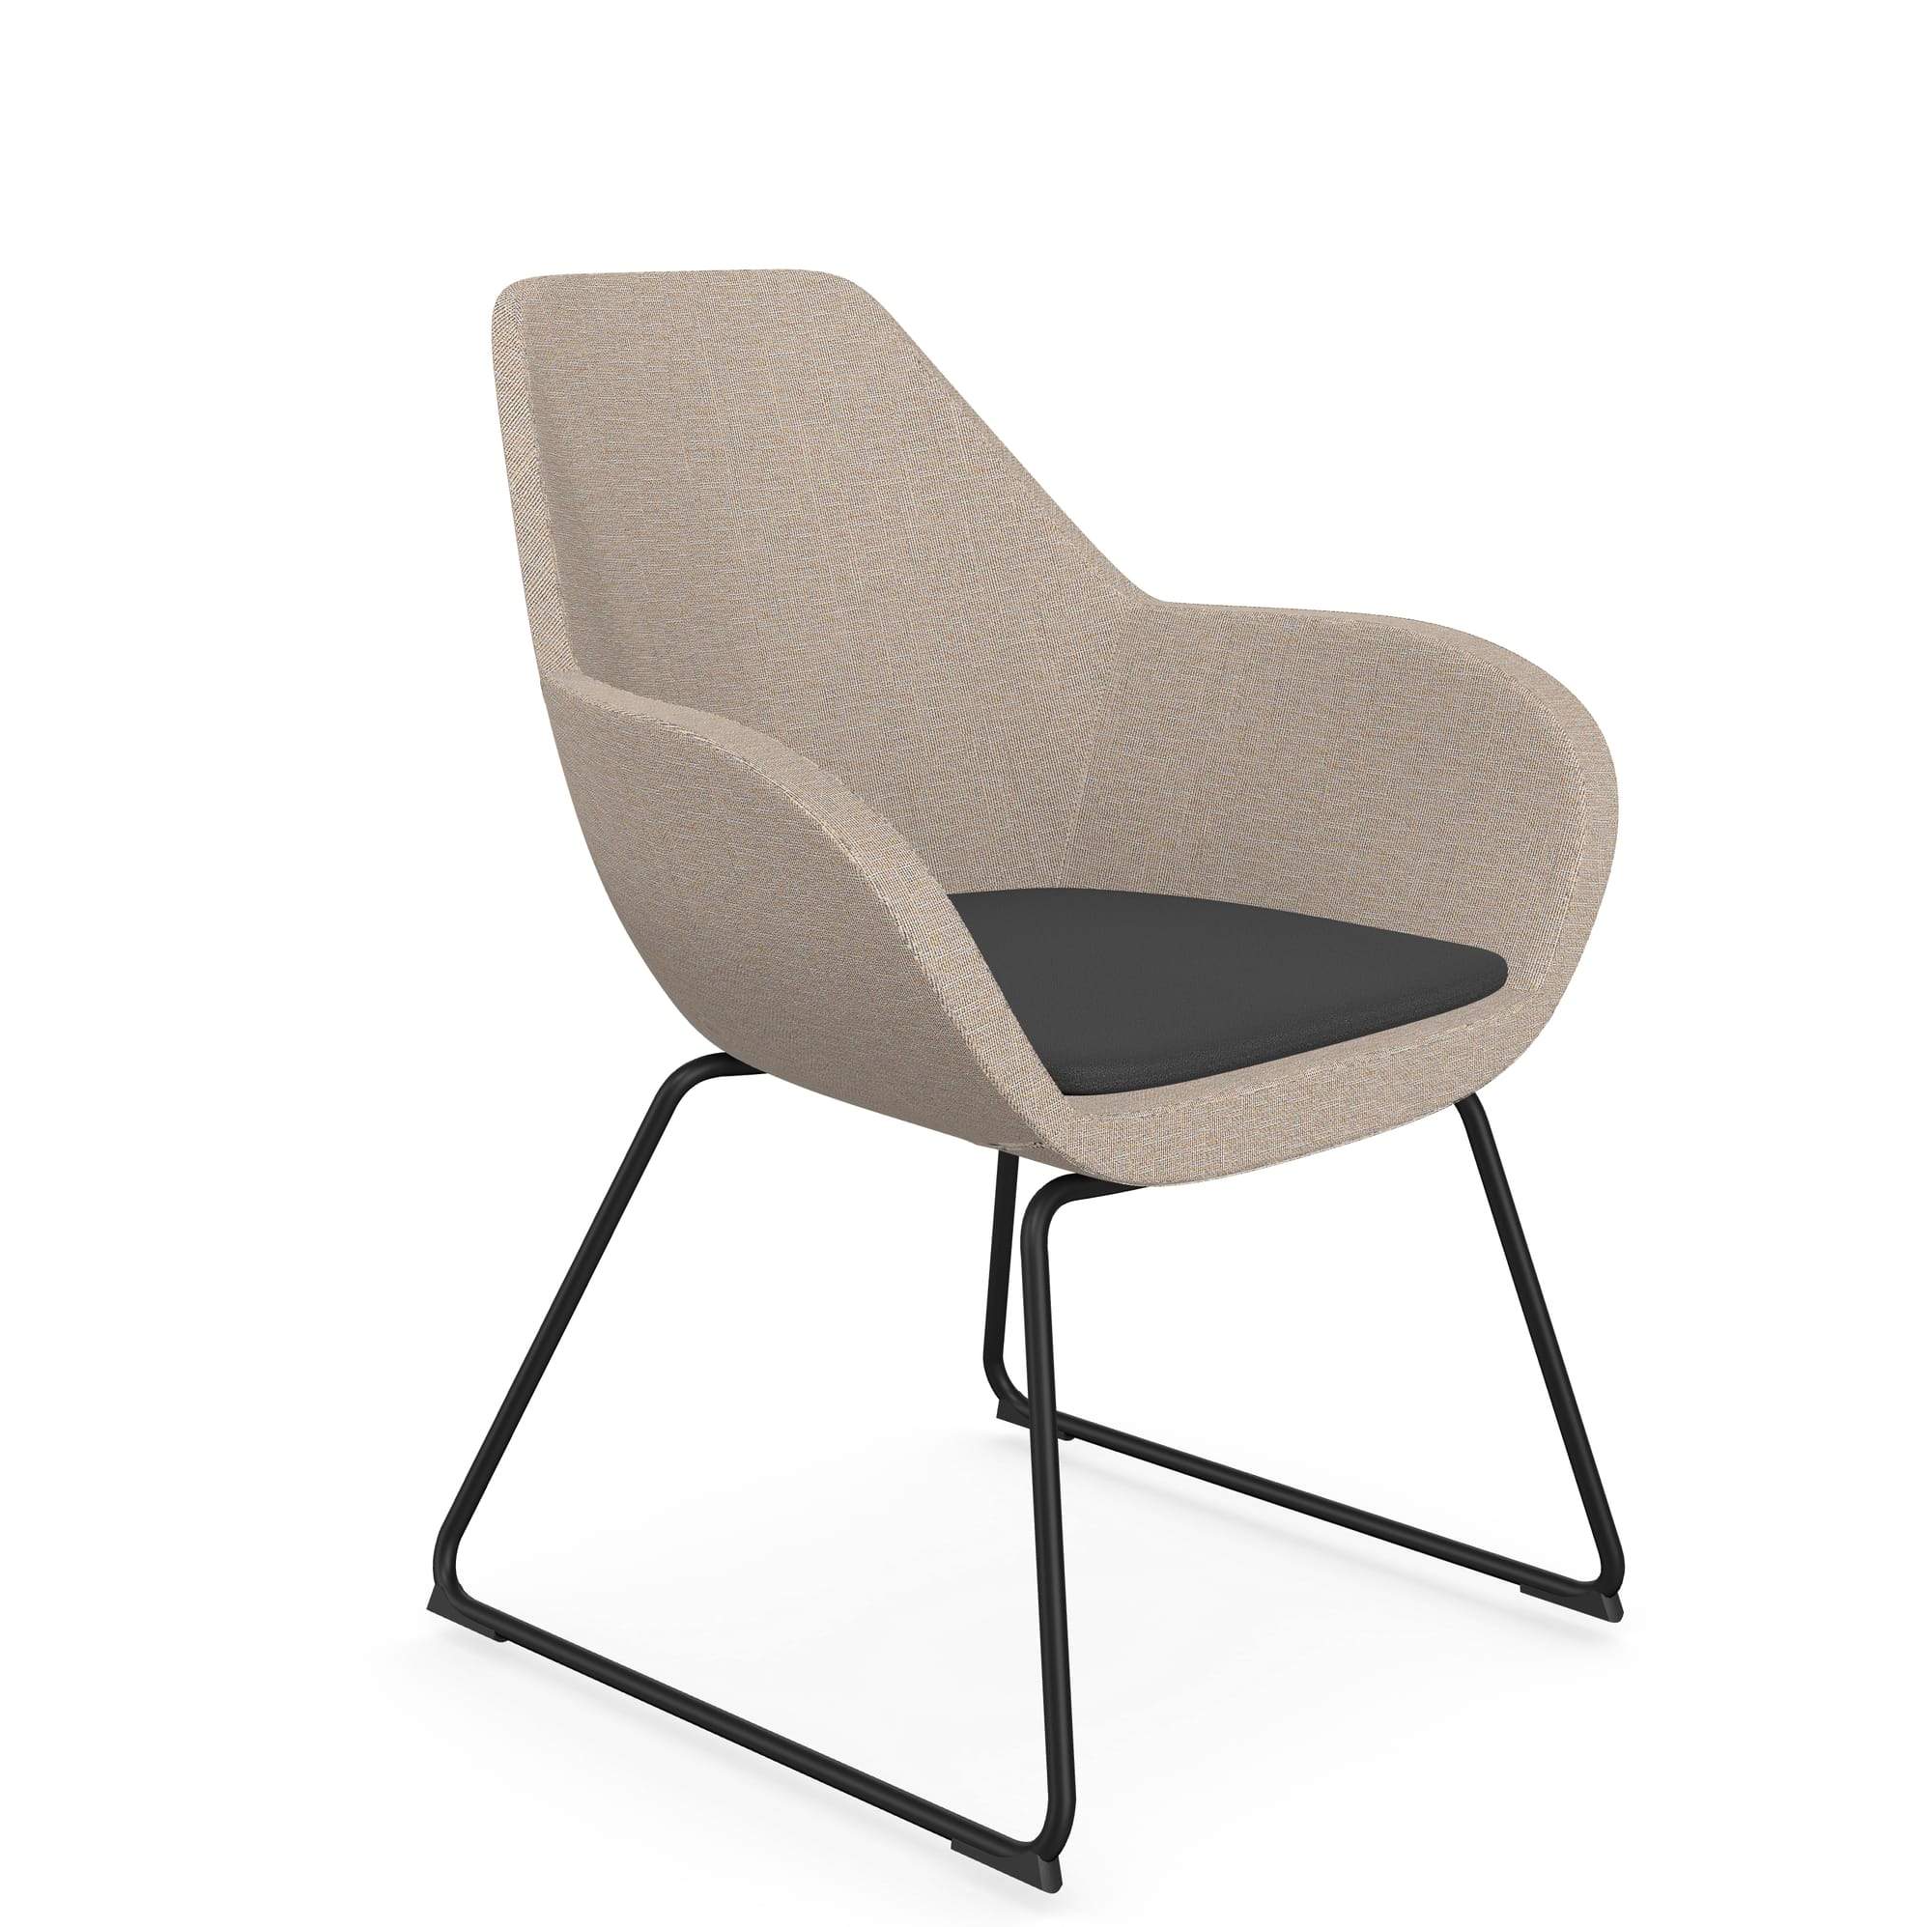 Fan Armchair with Cantilever Legs - Model 10V